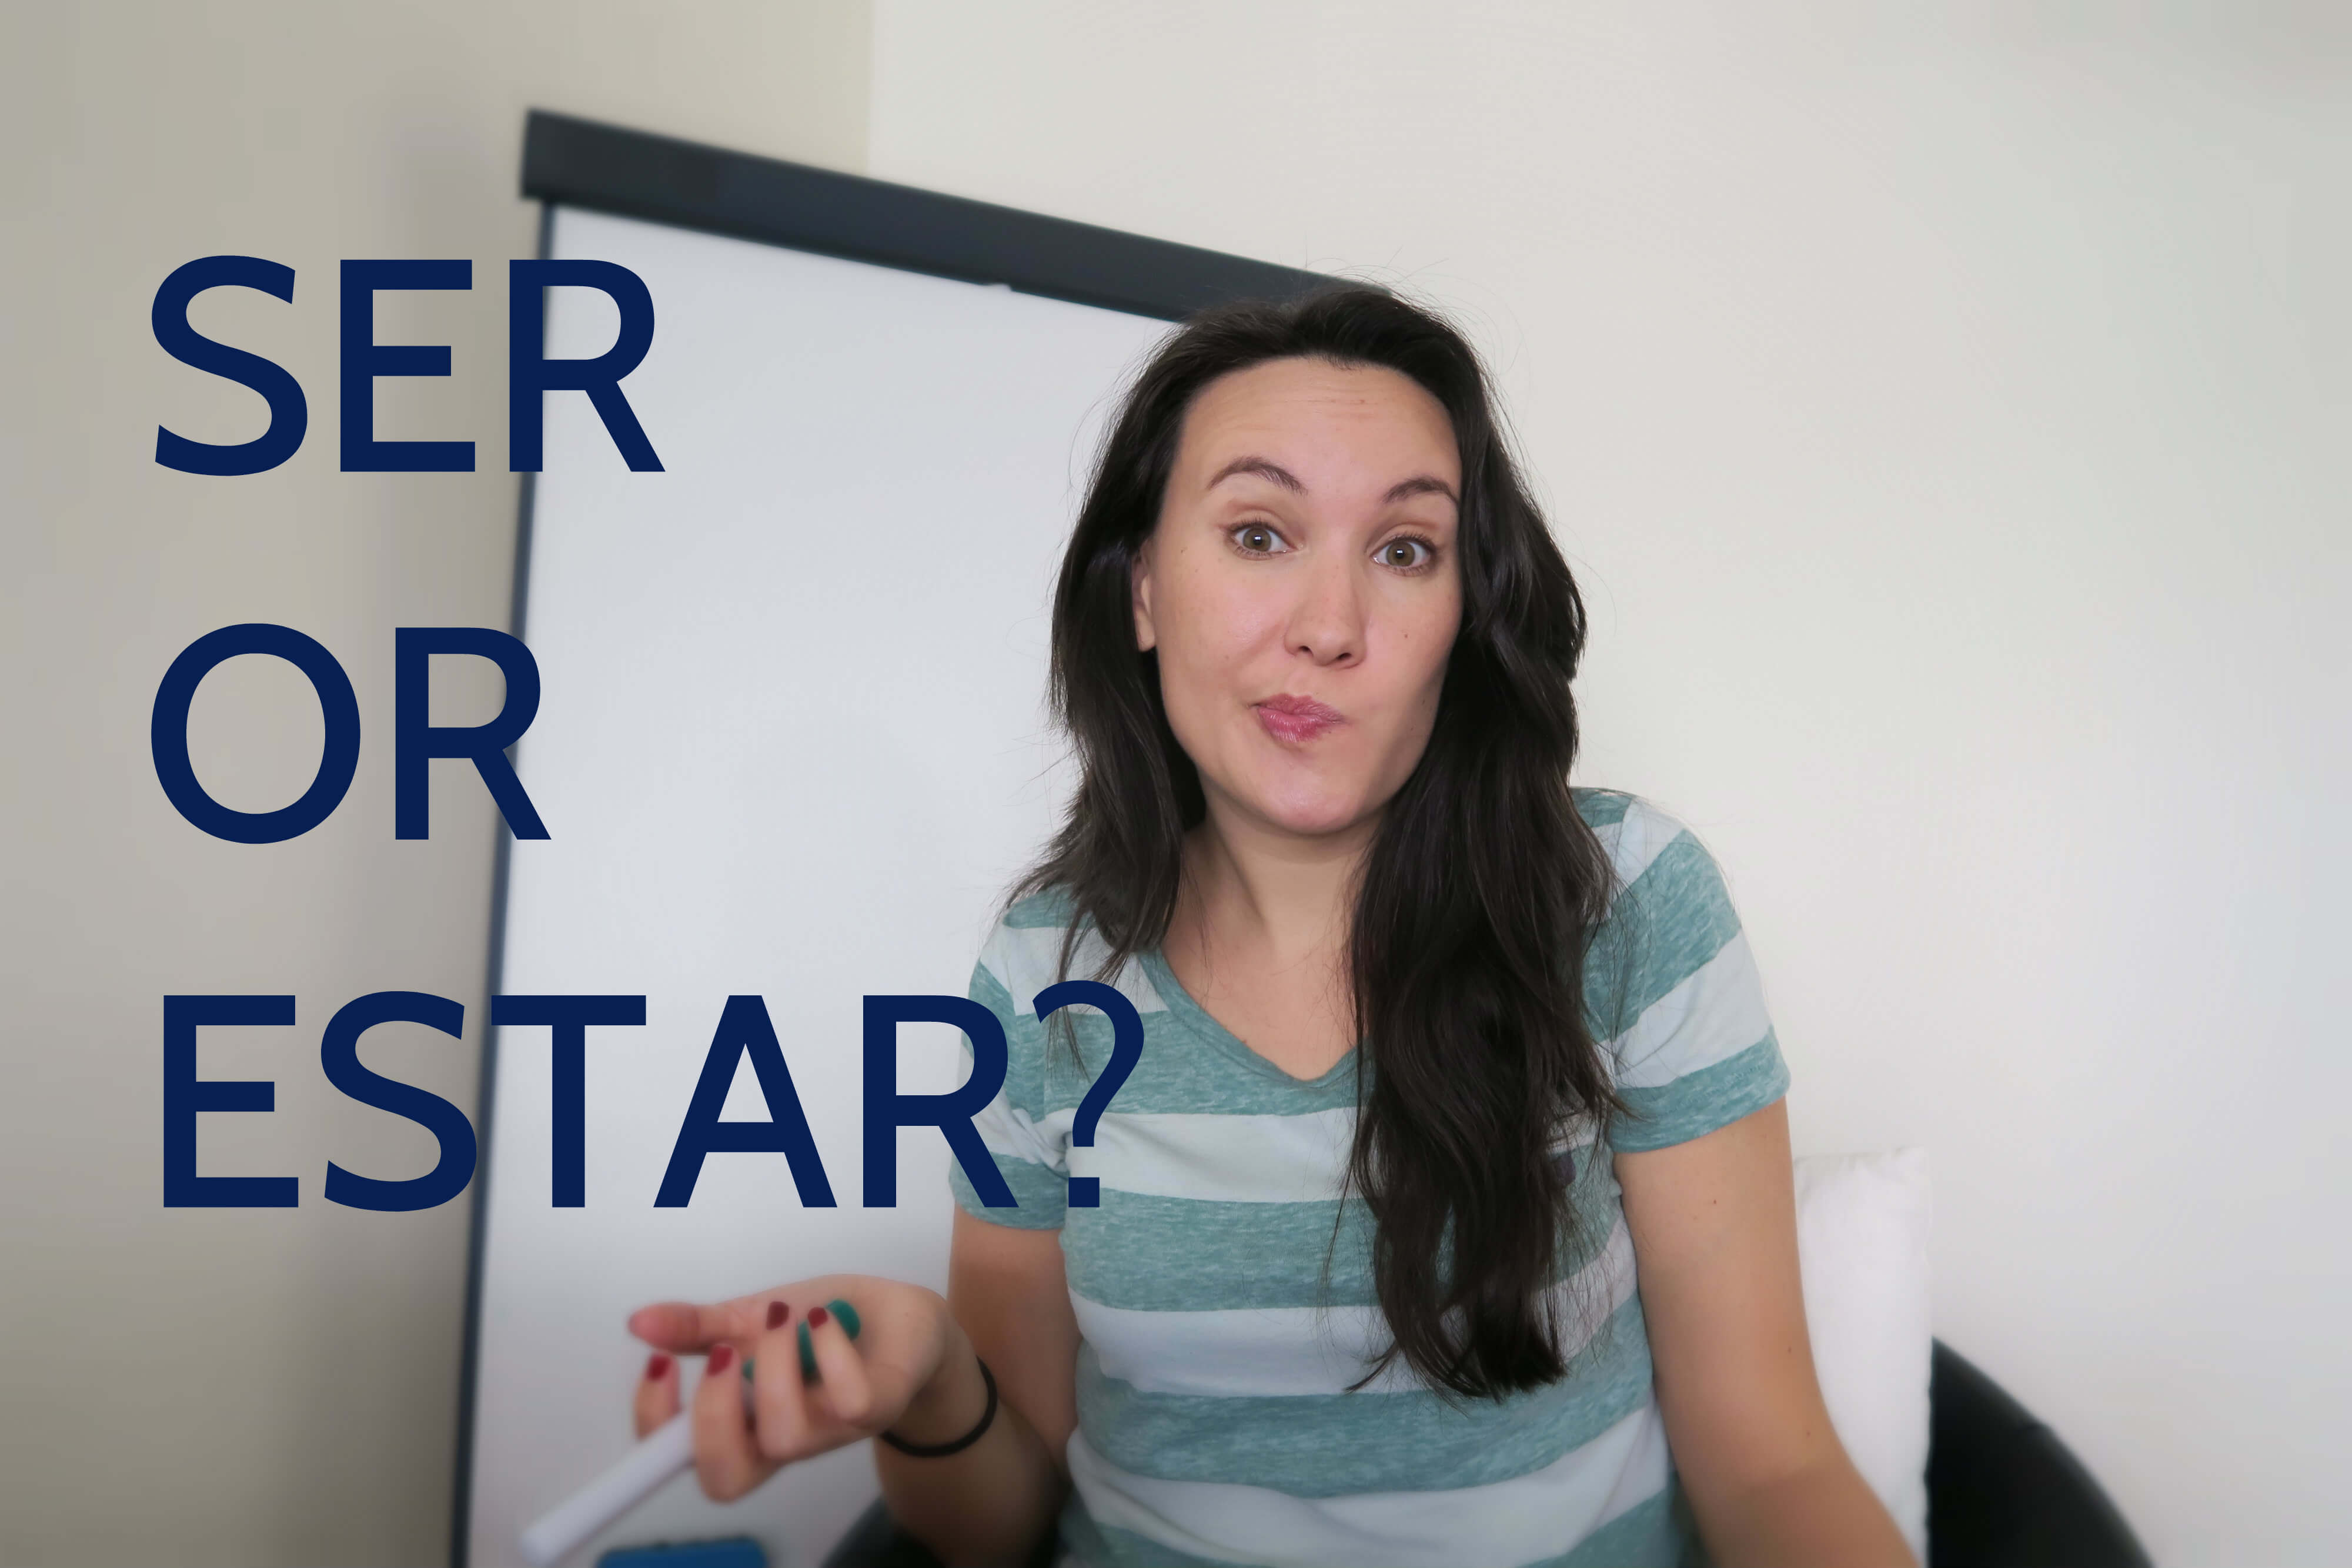 Ser or estar -to be in Spanish- complete version